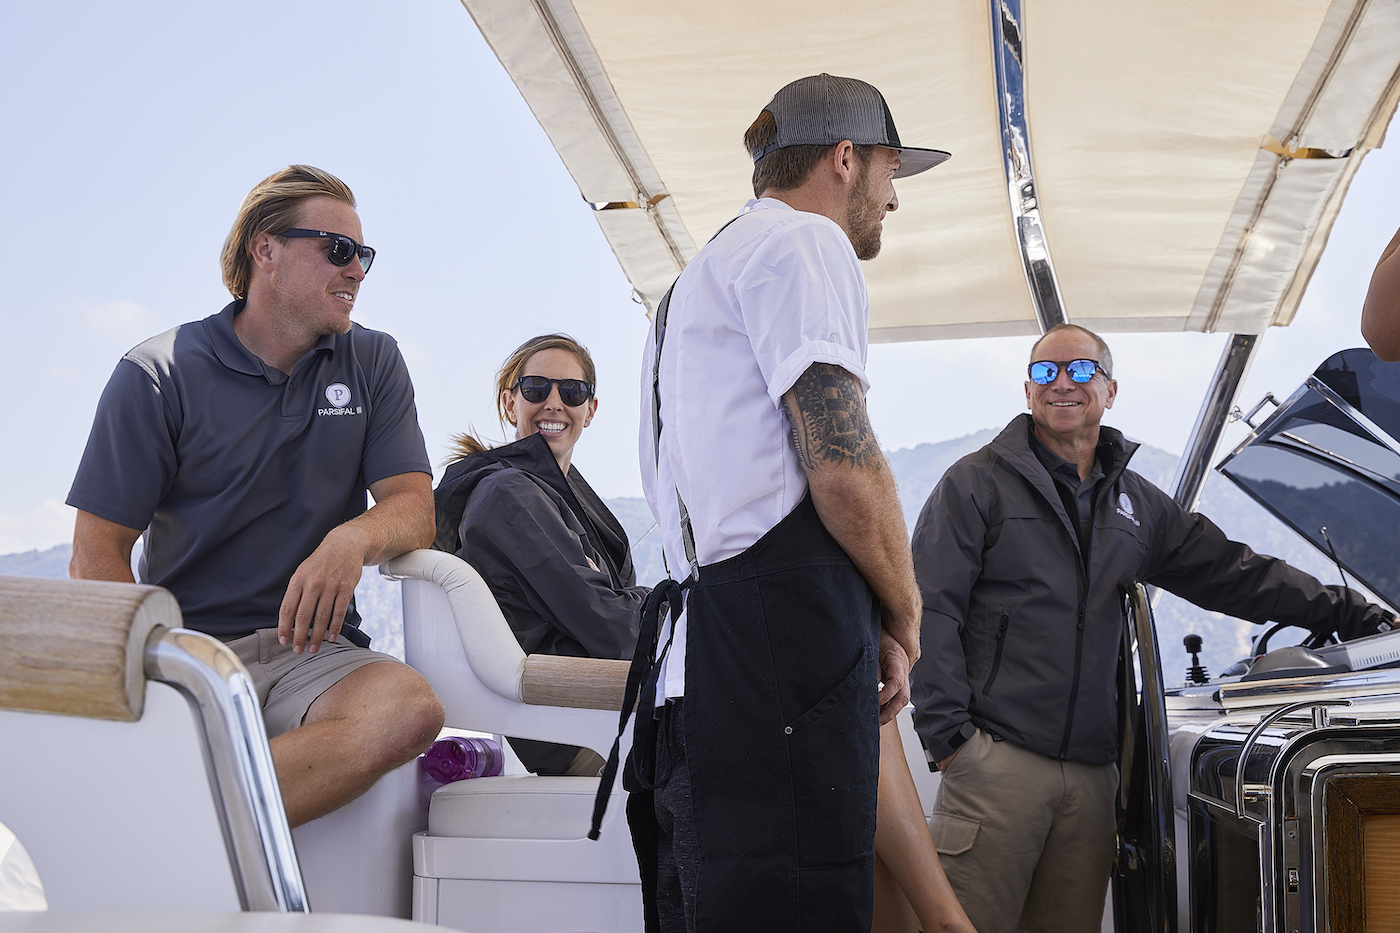 Paget Berry is seated next to Jenna MacGillivray, who is also seated. Adam Glick speaks to Captain Glenn Shephard on the Below Deck Sailing Yacht